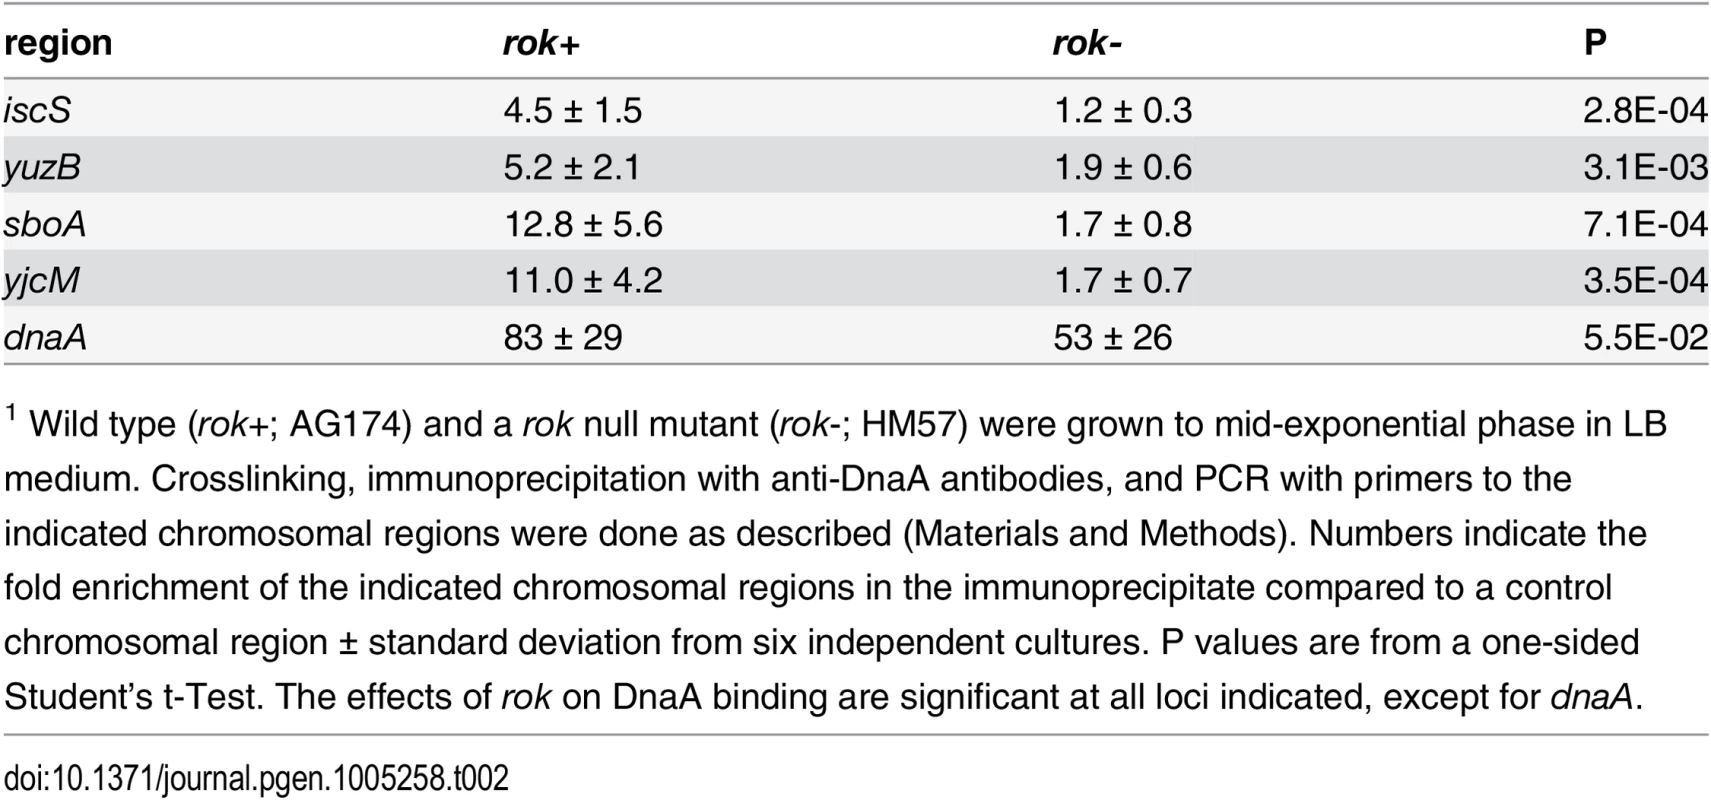 Effects of Rok on binding by DnaA in vivo<em class=&quot;ref&quot;><sup>1</sup></em>.